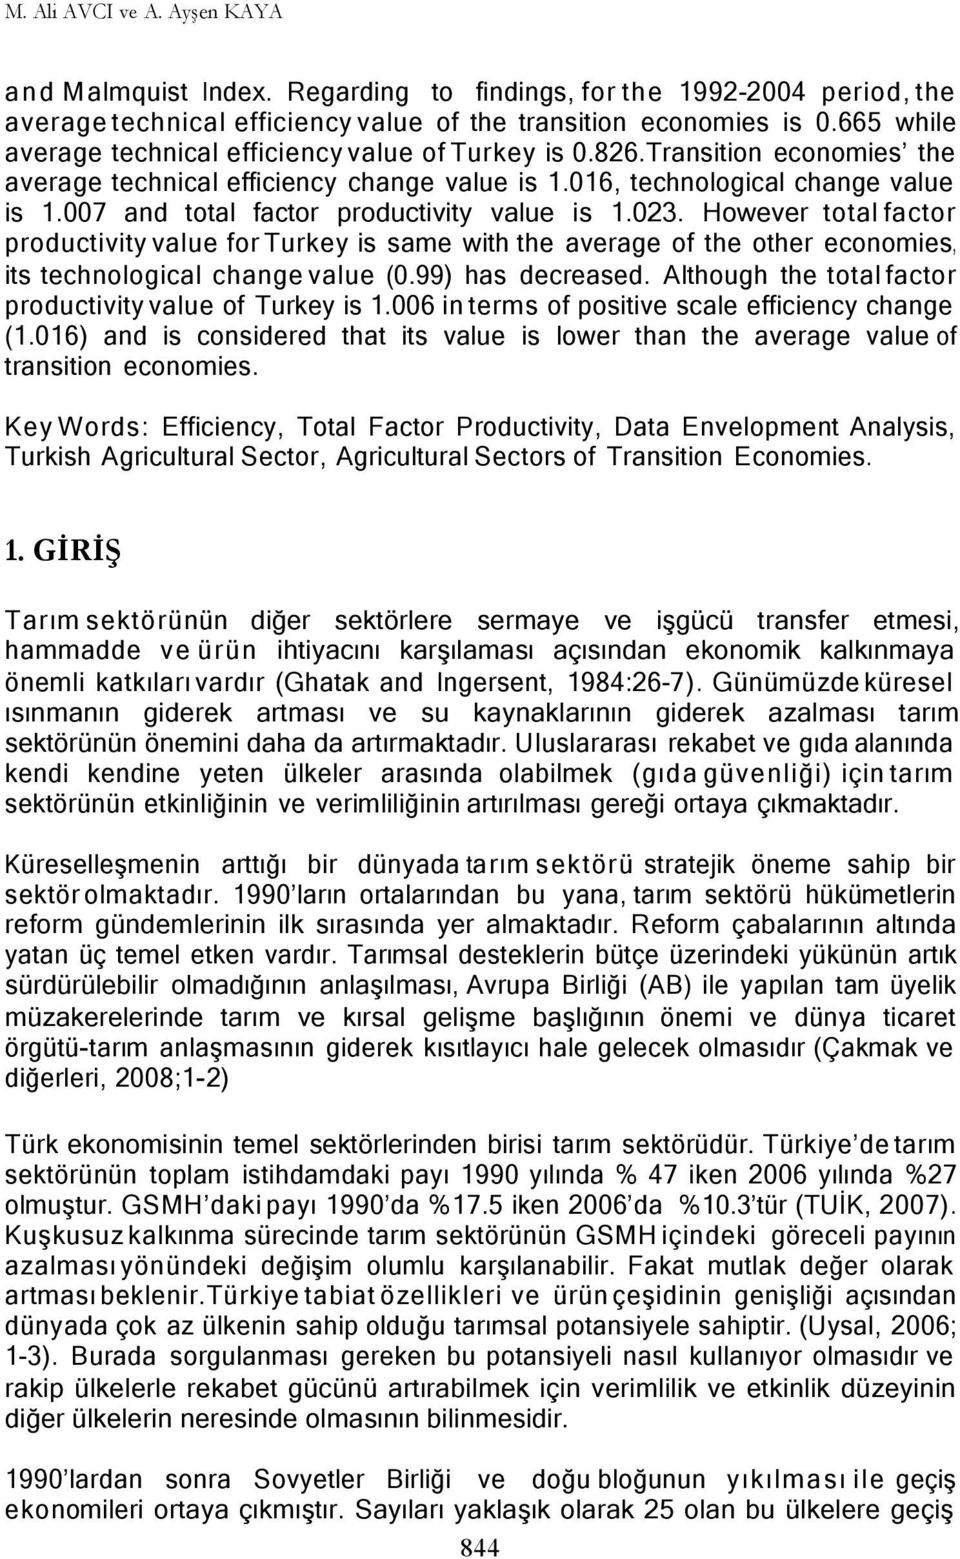 7 and oal facor produciviy value is 1.23. However oal facor produciviy value for Turkey is same wih he average of he oher economies, is echnological change value (.99) has decreased.